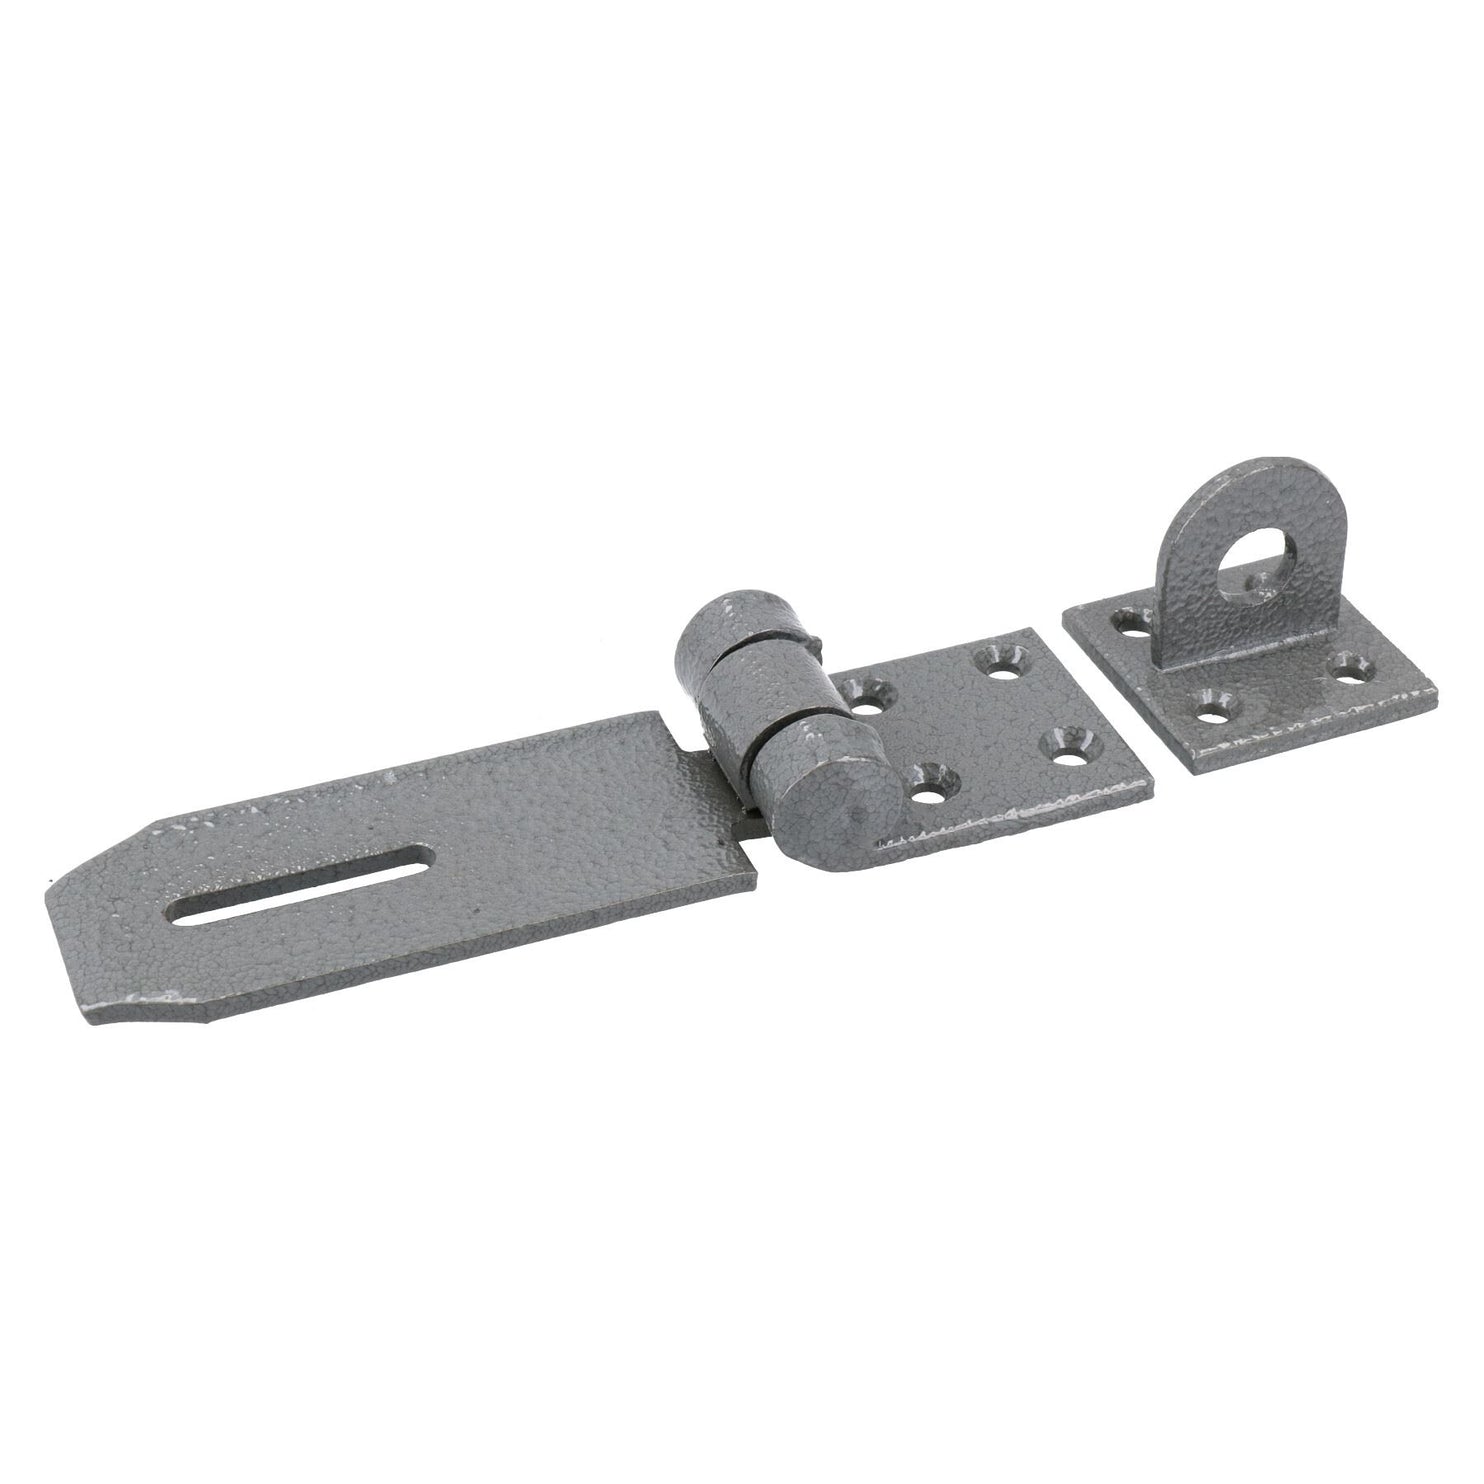 3.5" x 1.5" (89 x 38mm) Hasp And Staple Security Garage Shed Gate Door Latch Lock